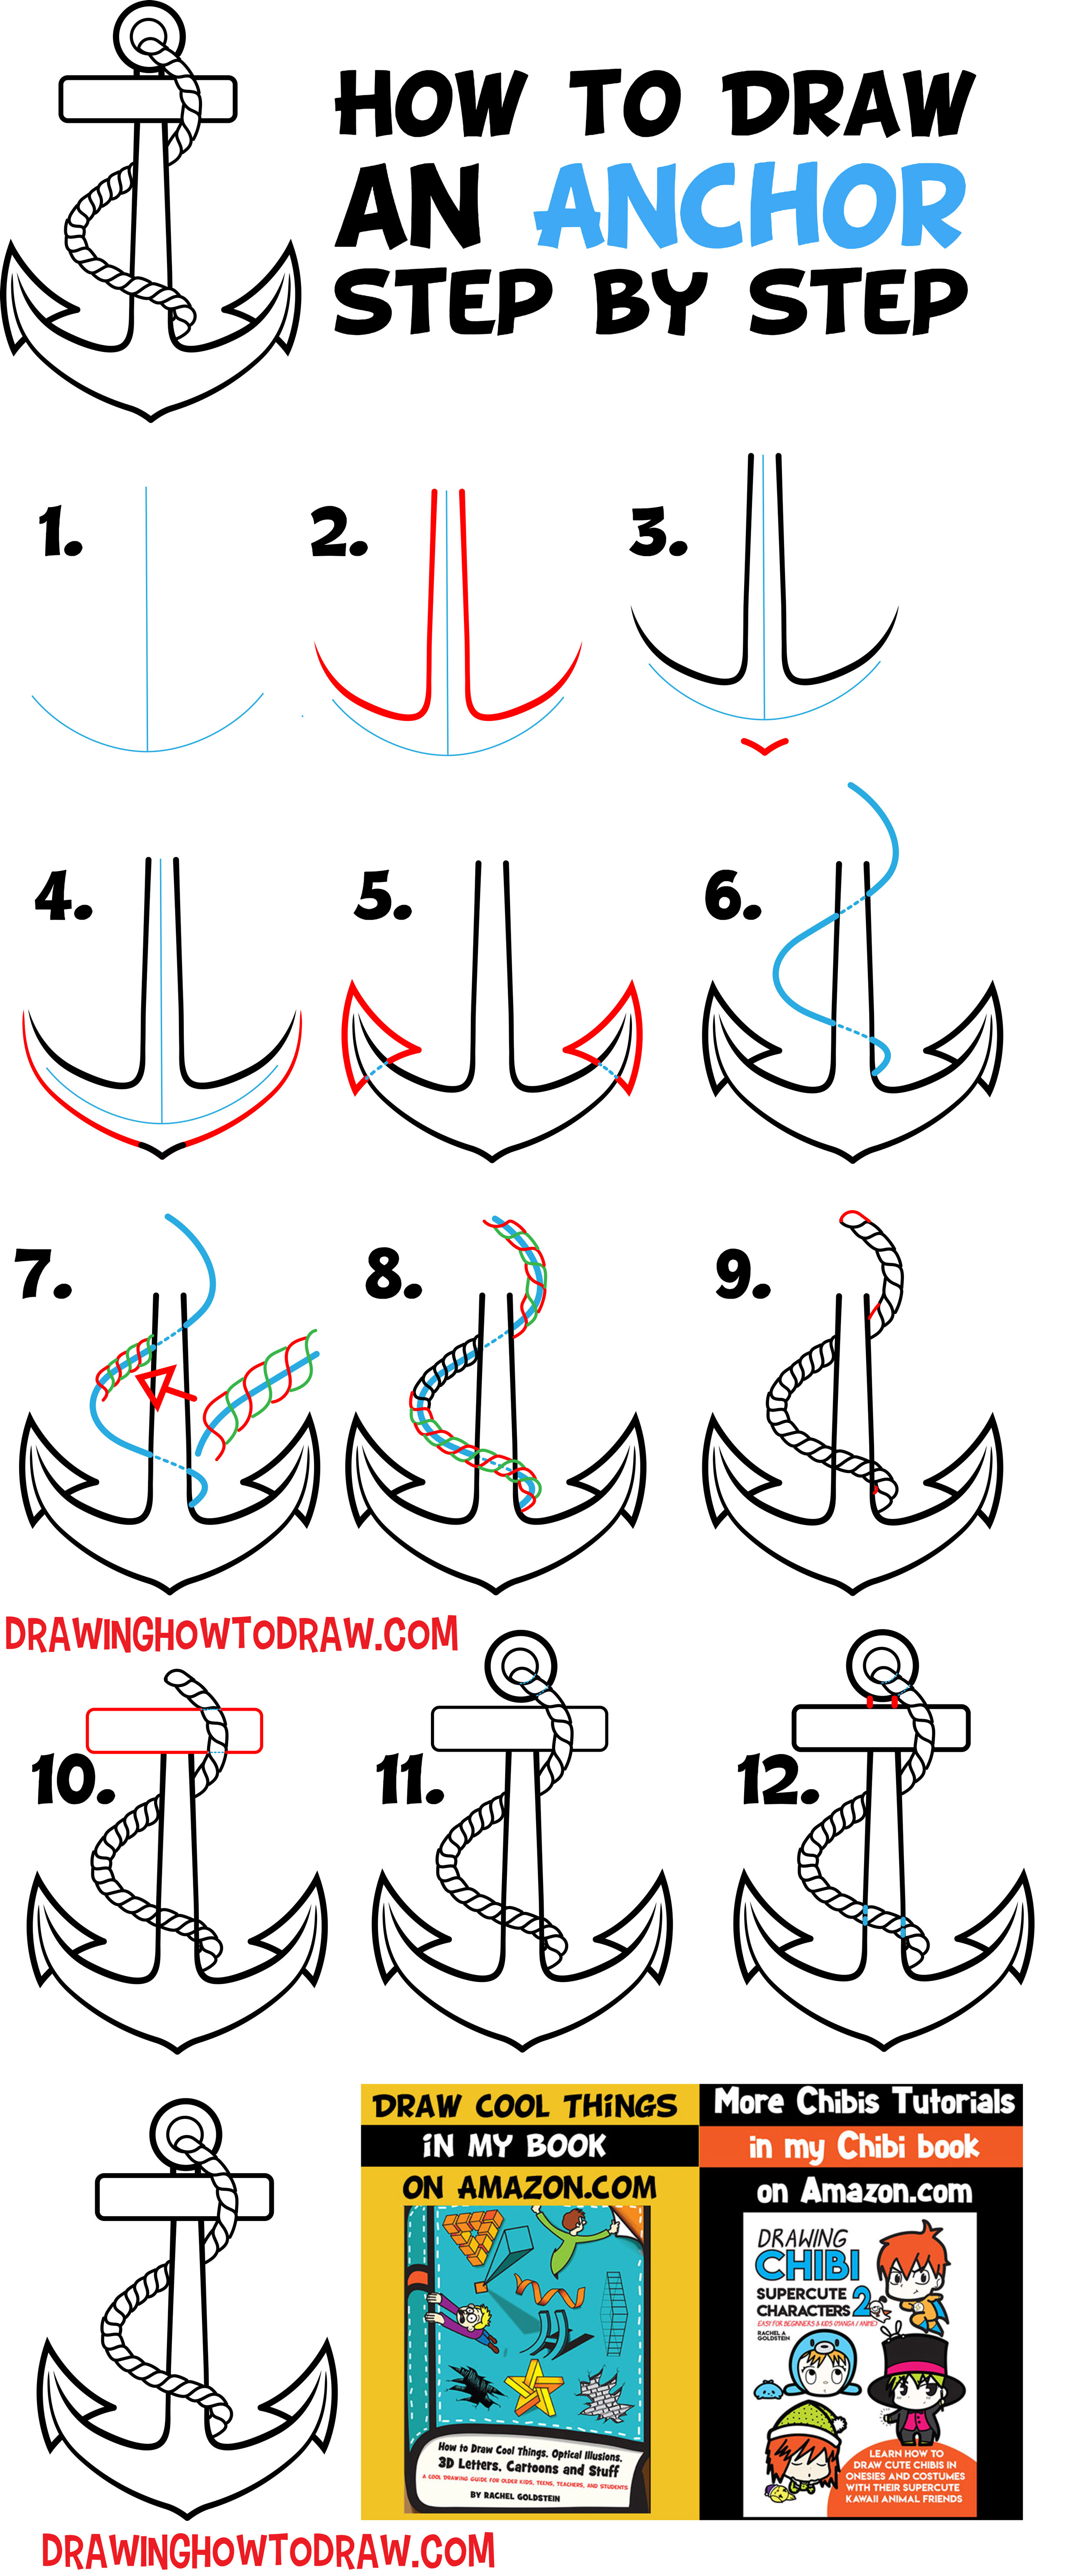 How to Draw an Anchor Easy Step by Step Drawing Tutorial for Beginners